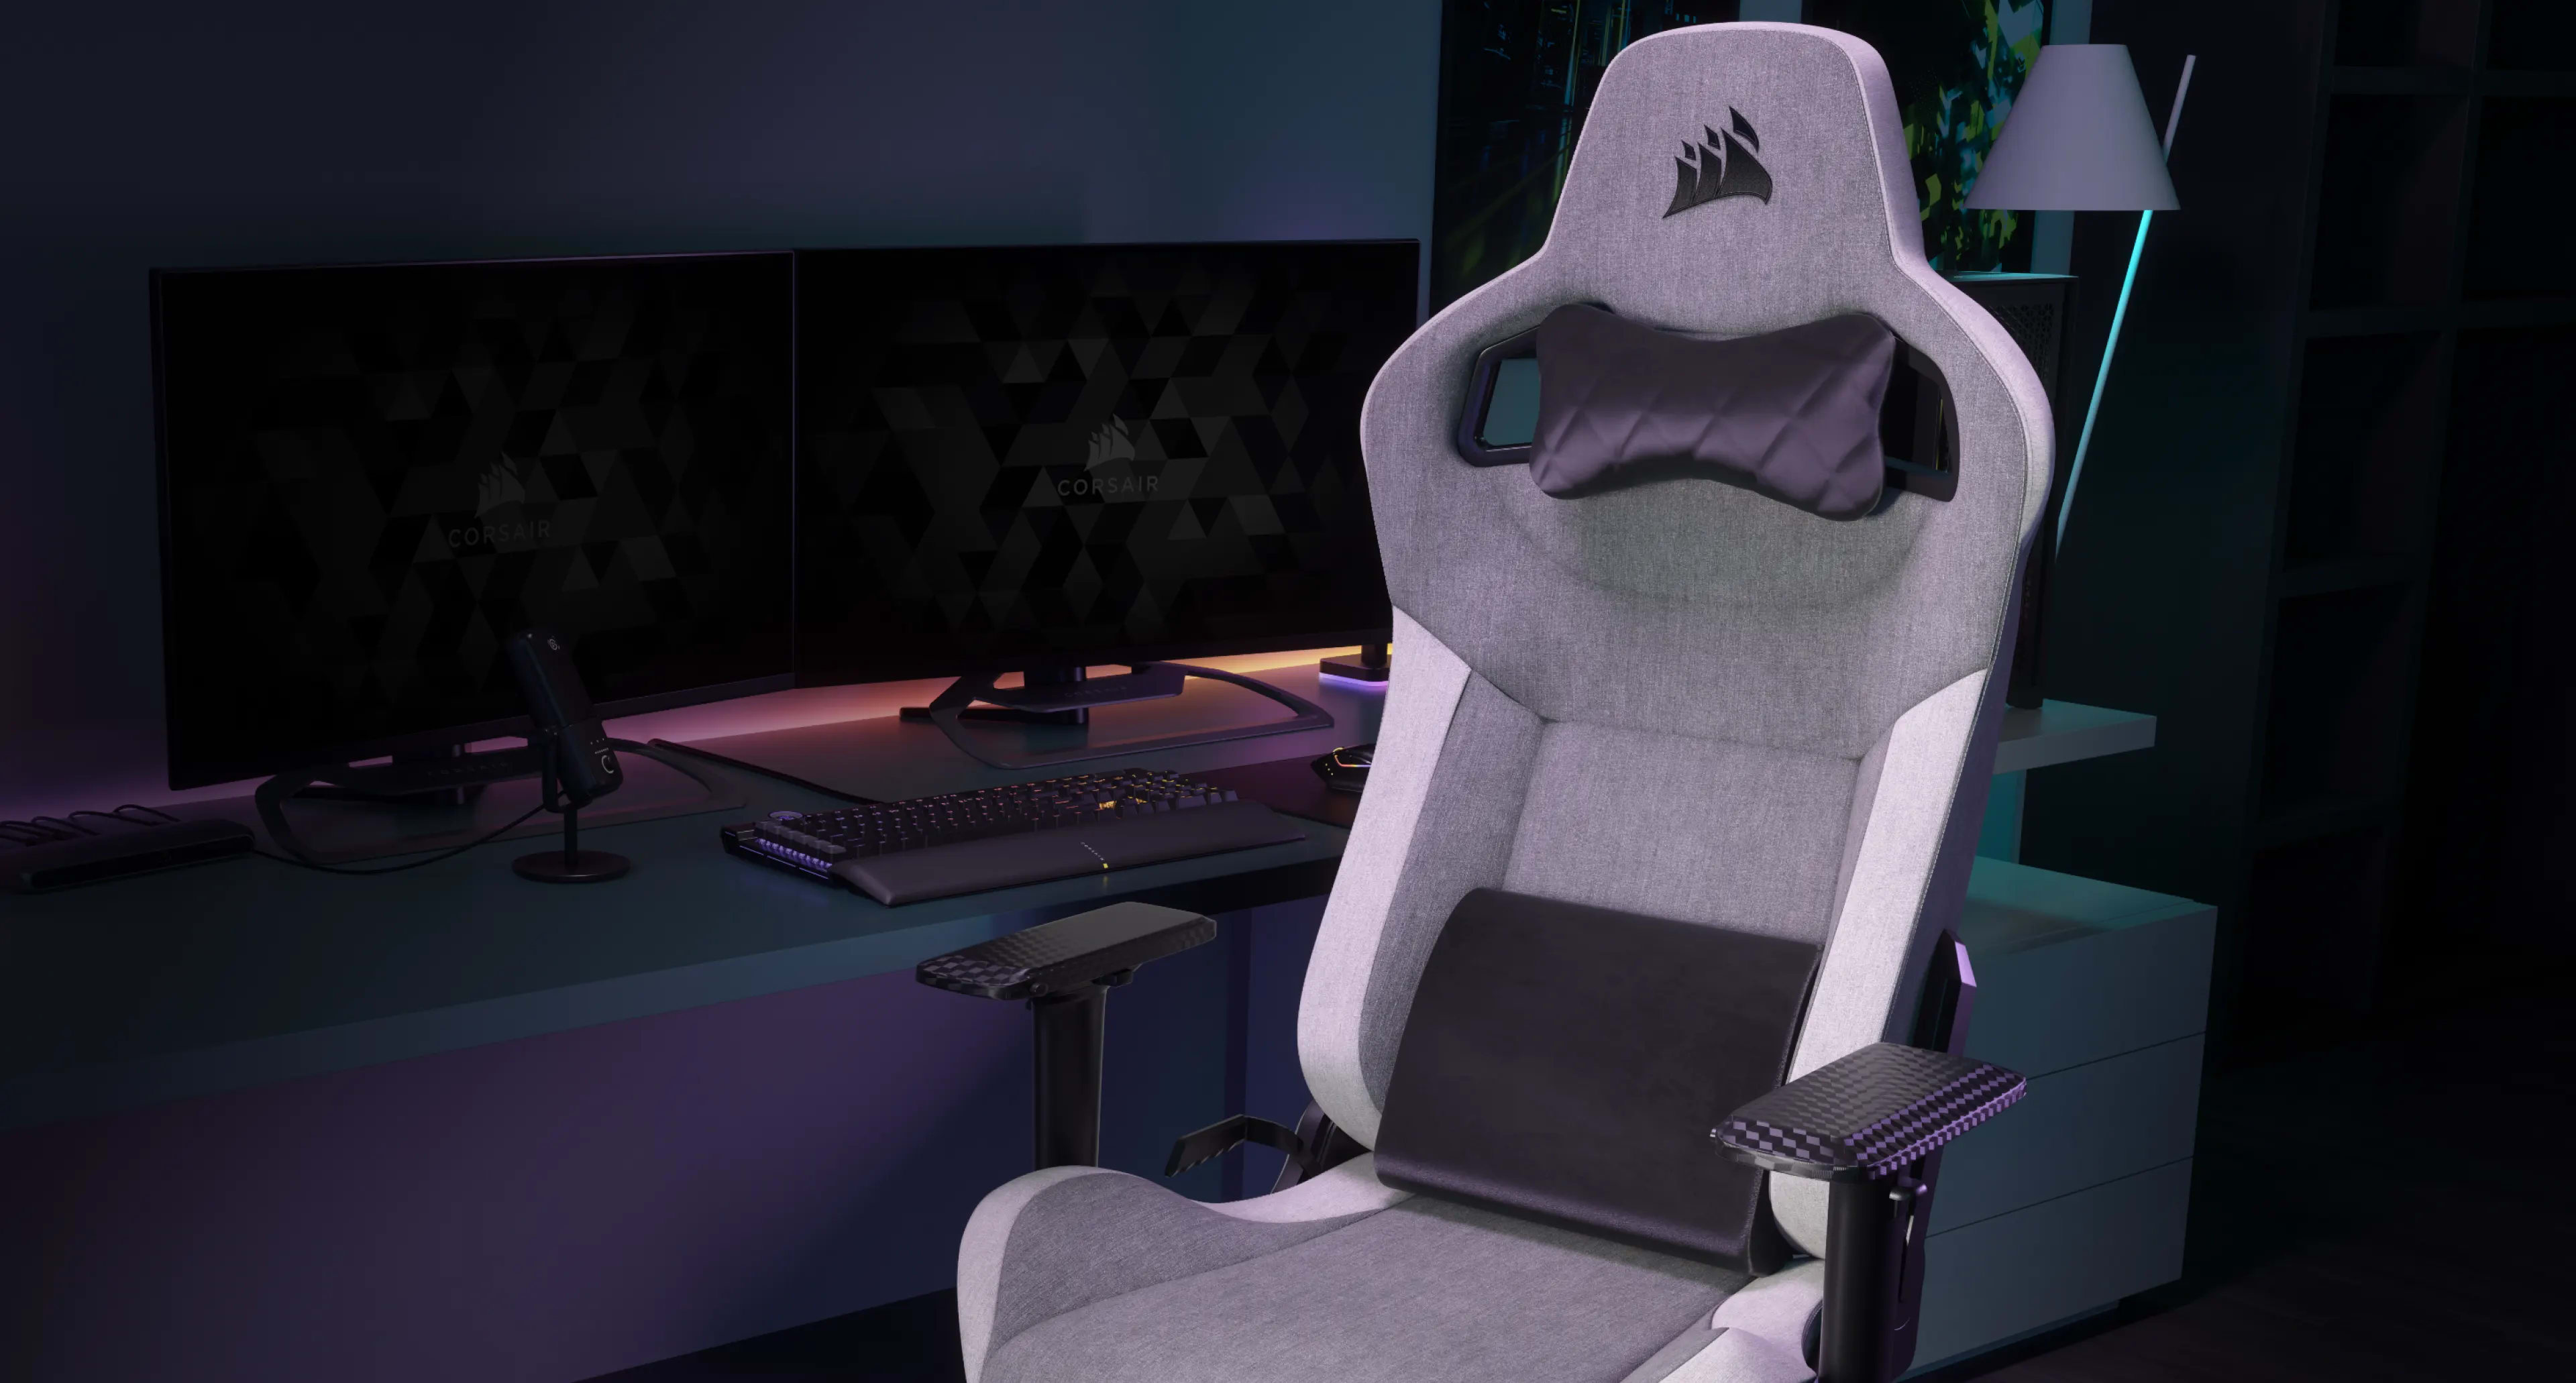 Front view of the T3 RUSH gaming chair.